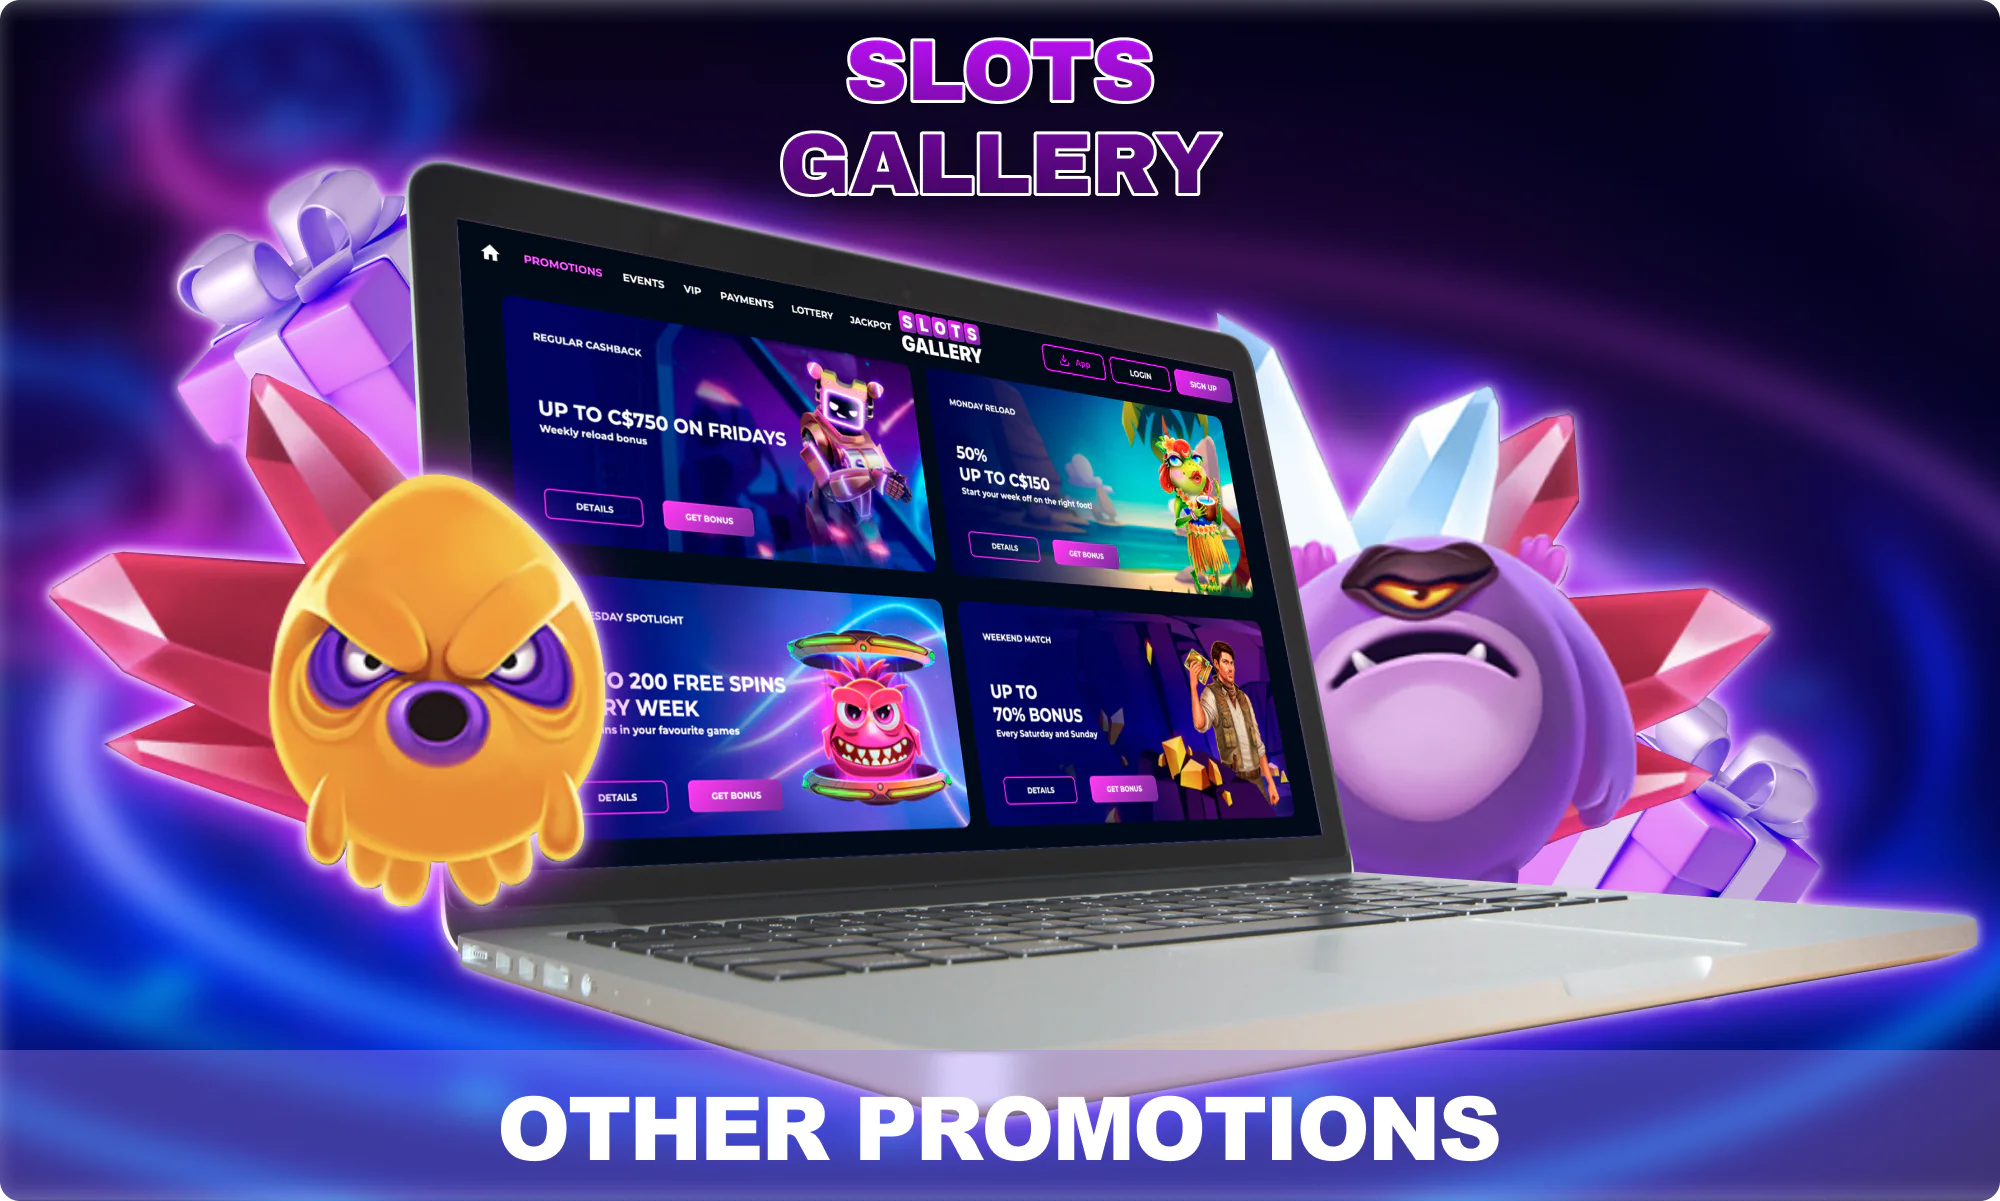 More Promotion offers for Canadian players at Slots Gallery